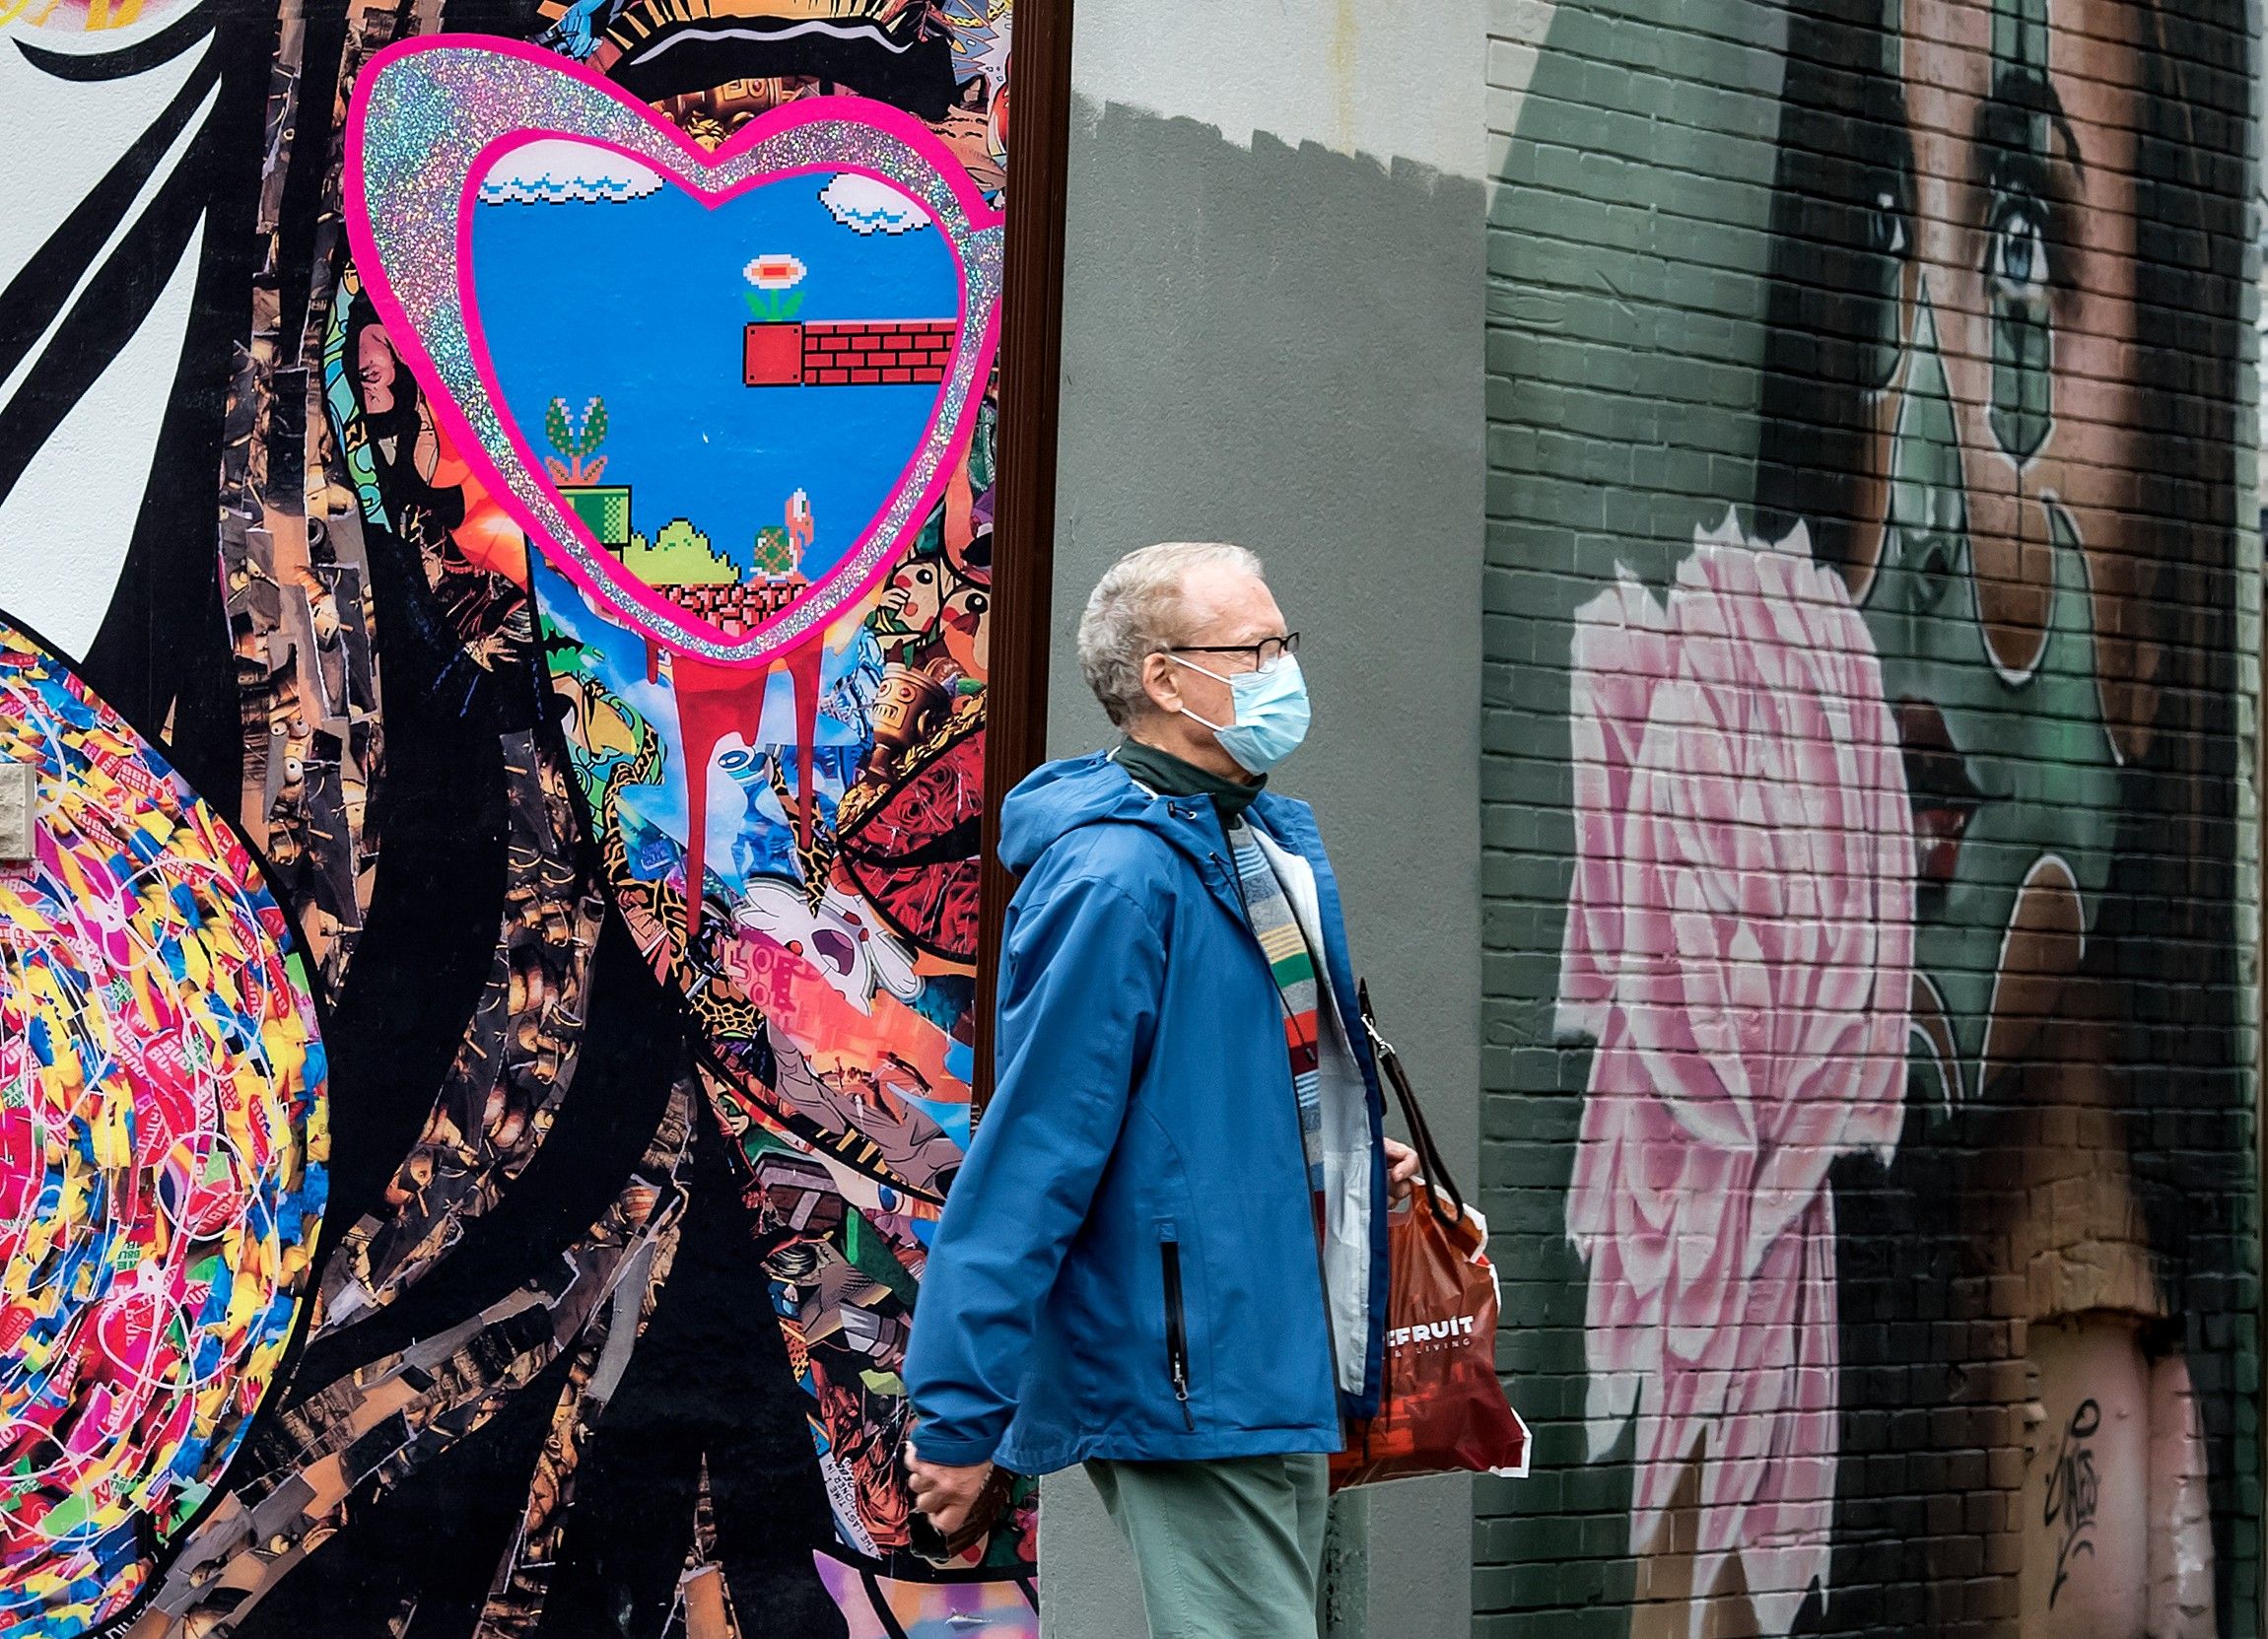 A pedestrian wearing a mask walks past a mural on Toronto’s Church Street during the Covid 19 pandemic, Thursday October 8, 2020